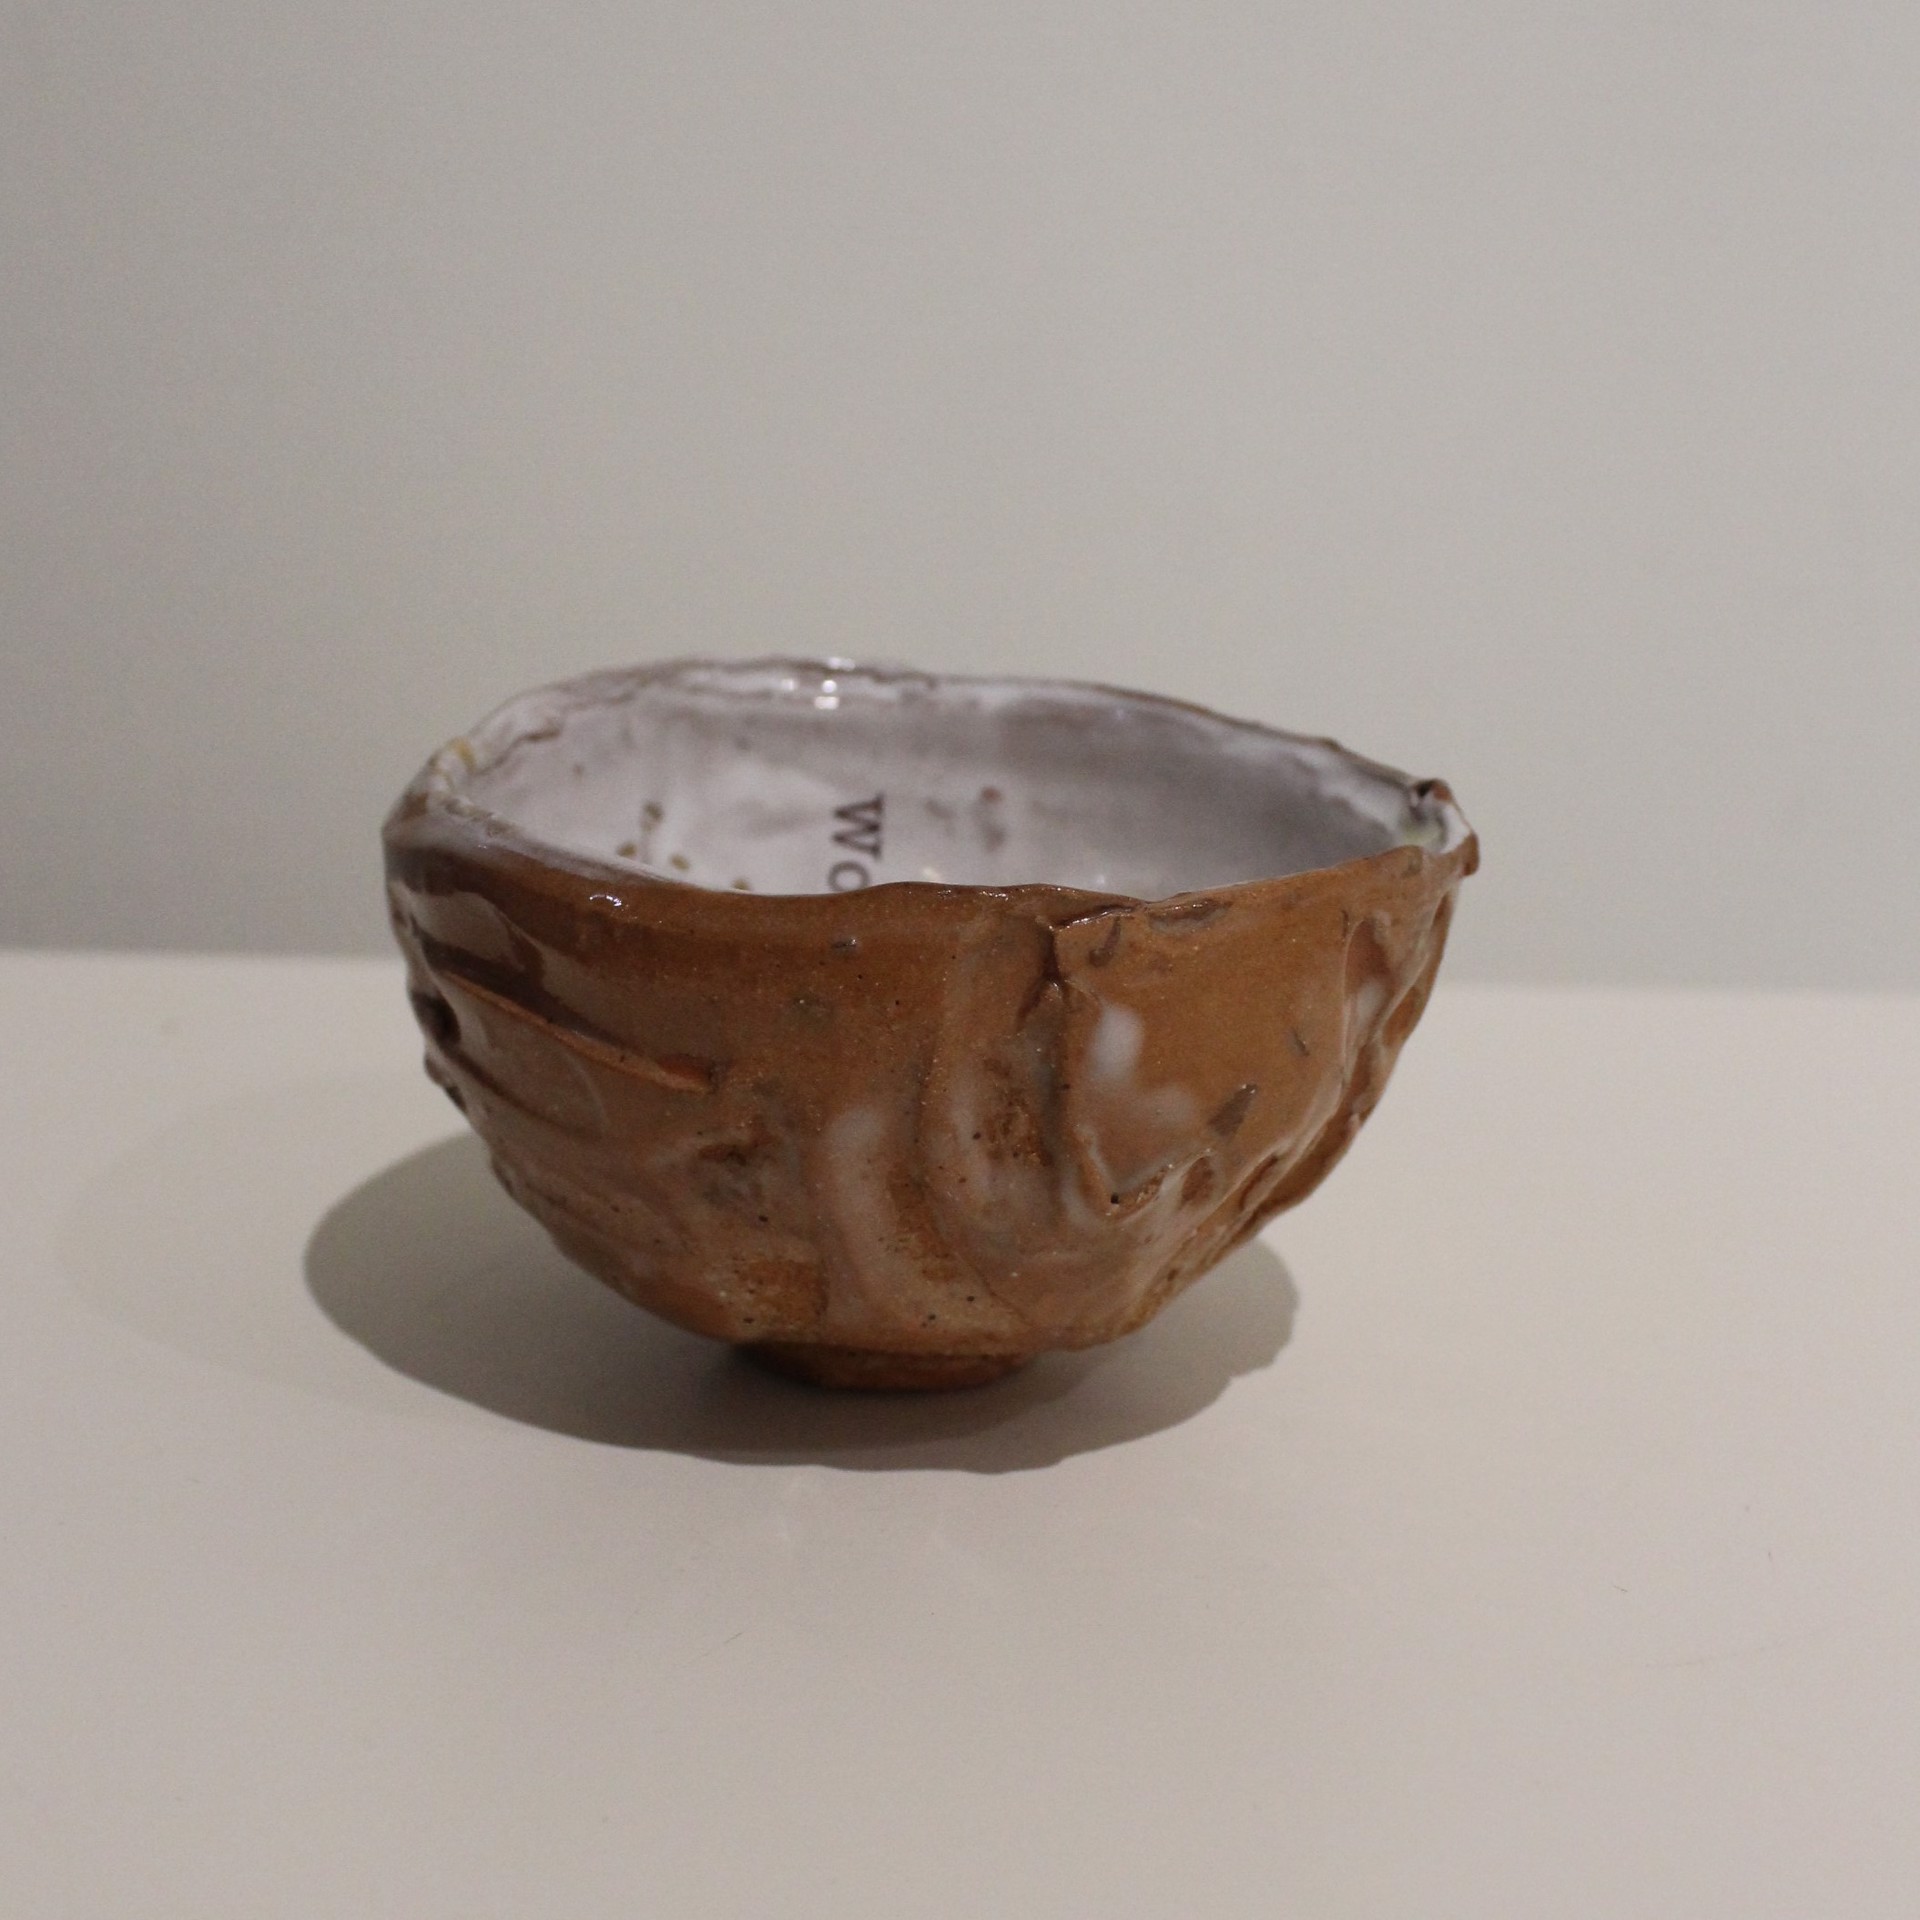 Tea Bowl 6 (worthy) by Therese Knowles